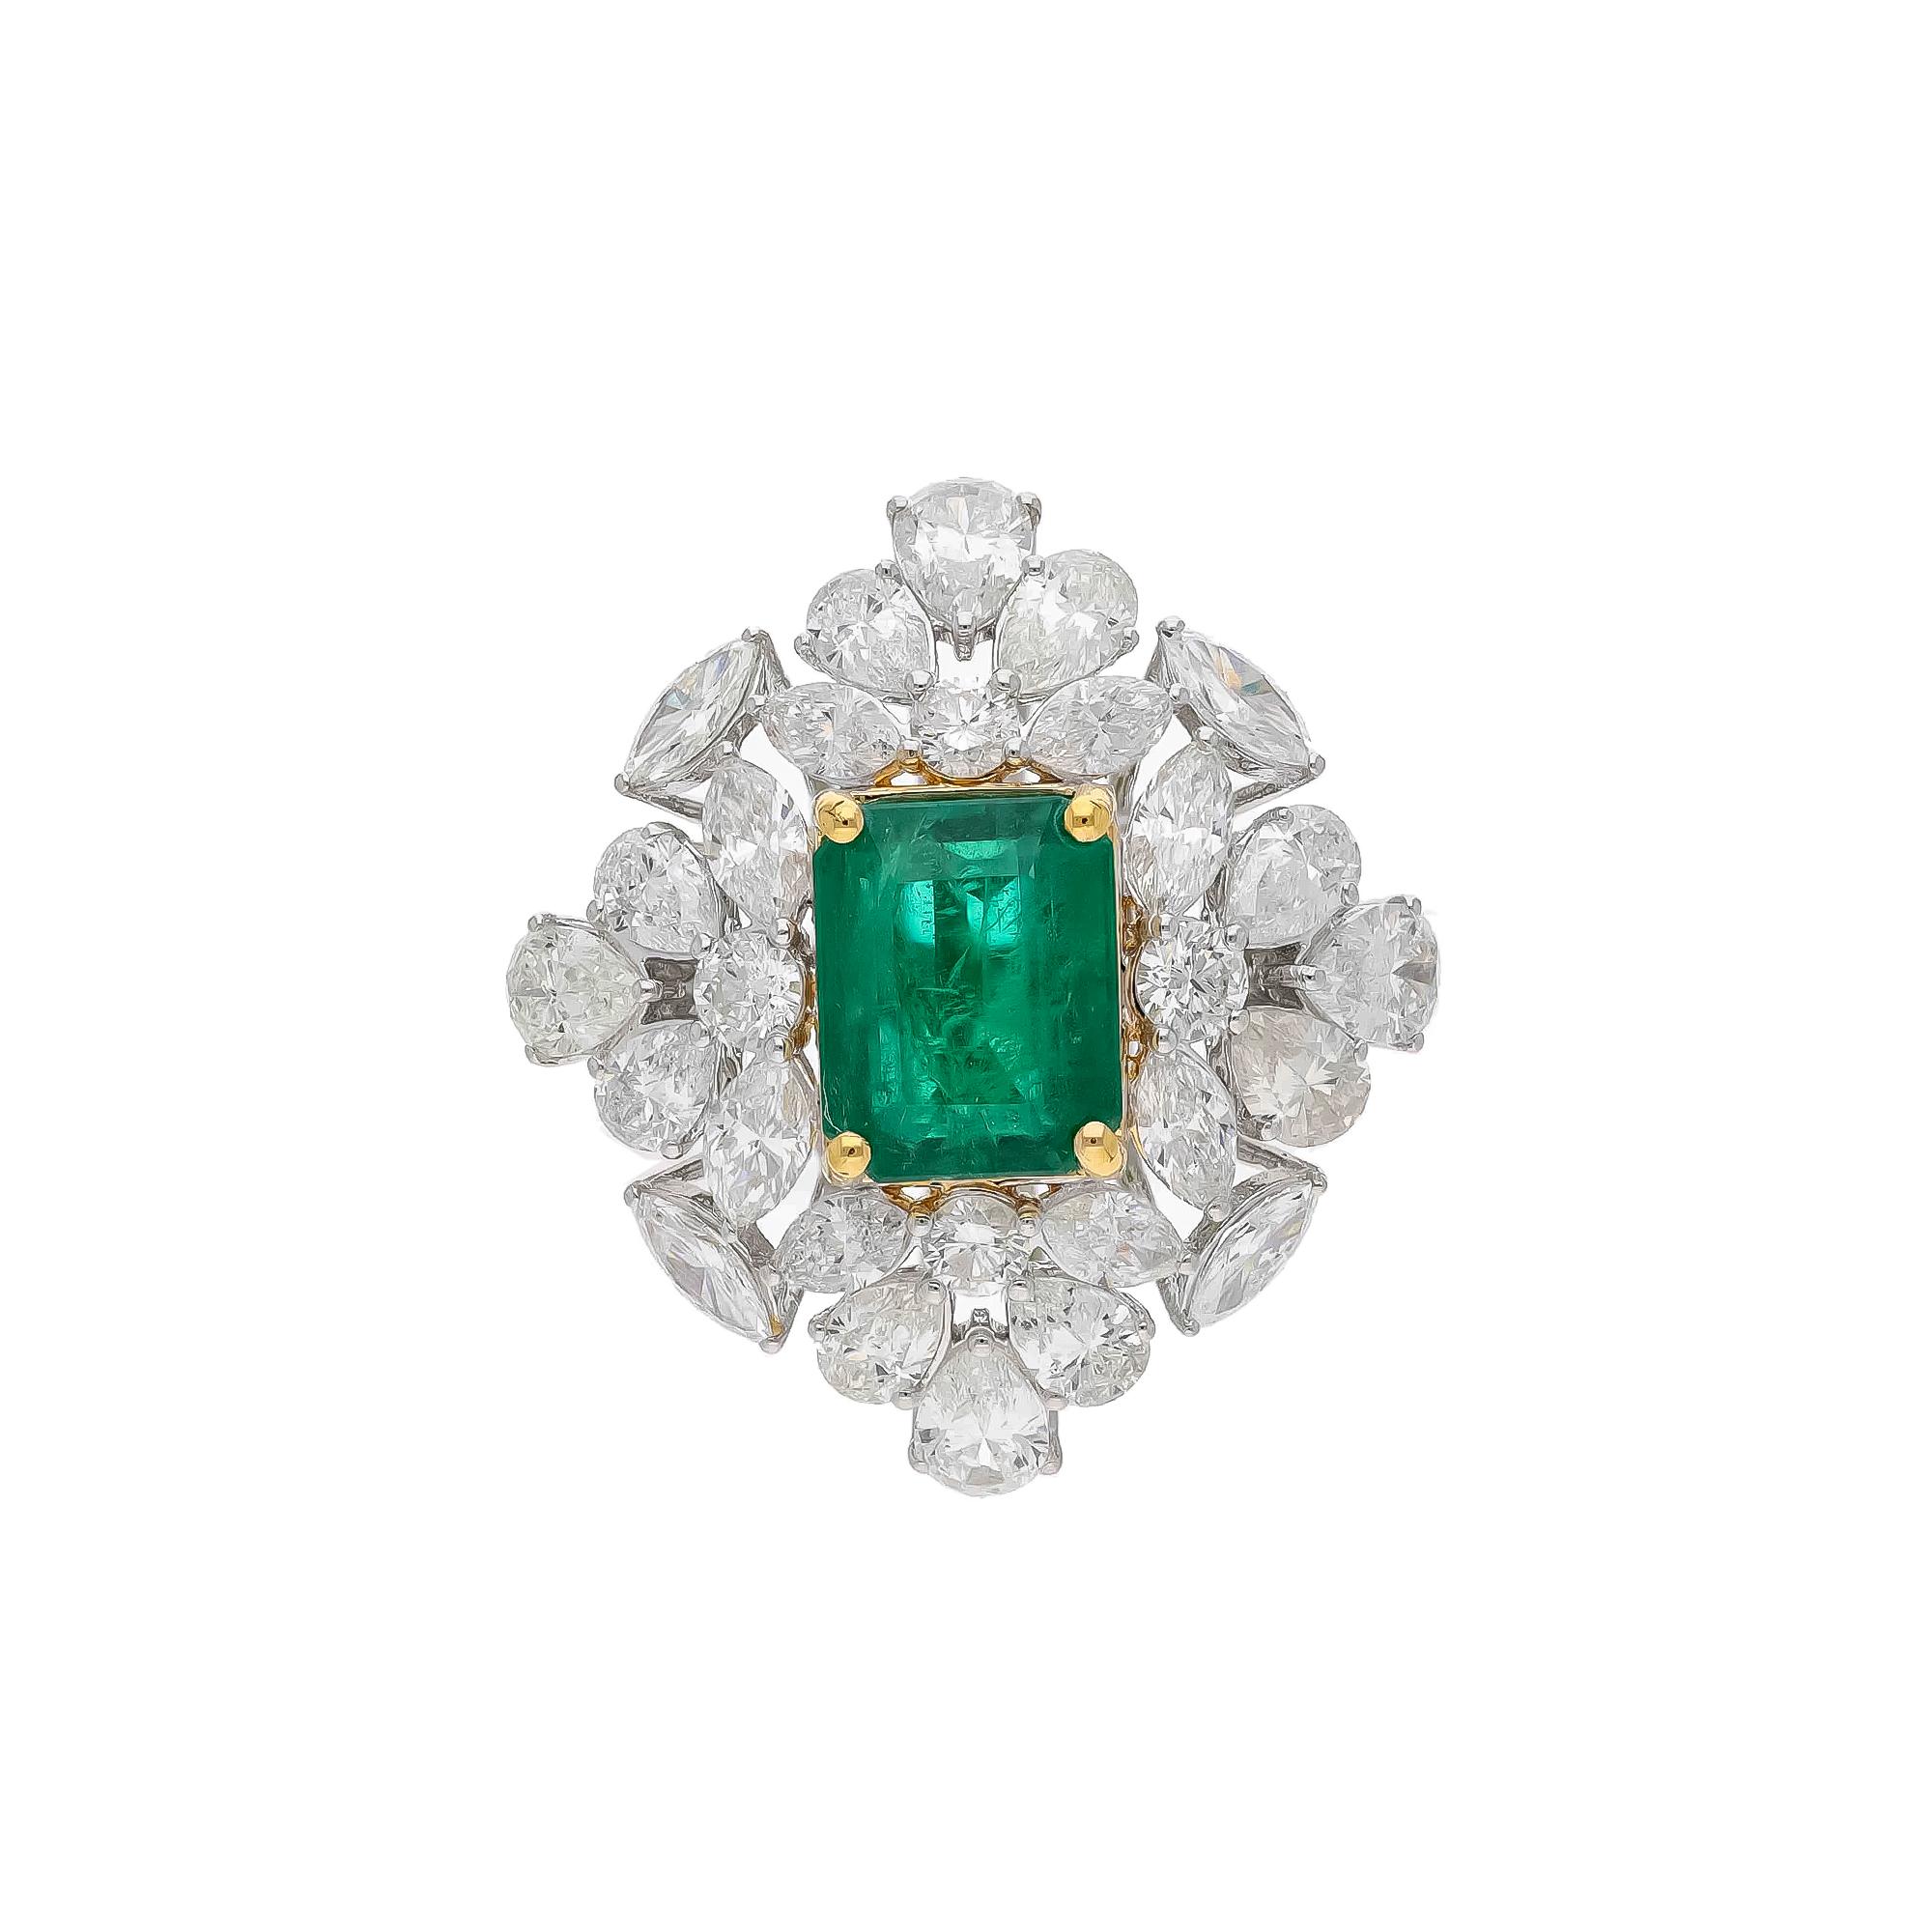 Antique Cushion Cut Natural Zambian Emerald Ring with Diamonds and 18k Gold For Sale